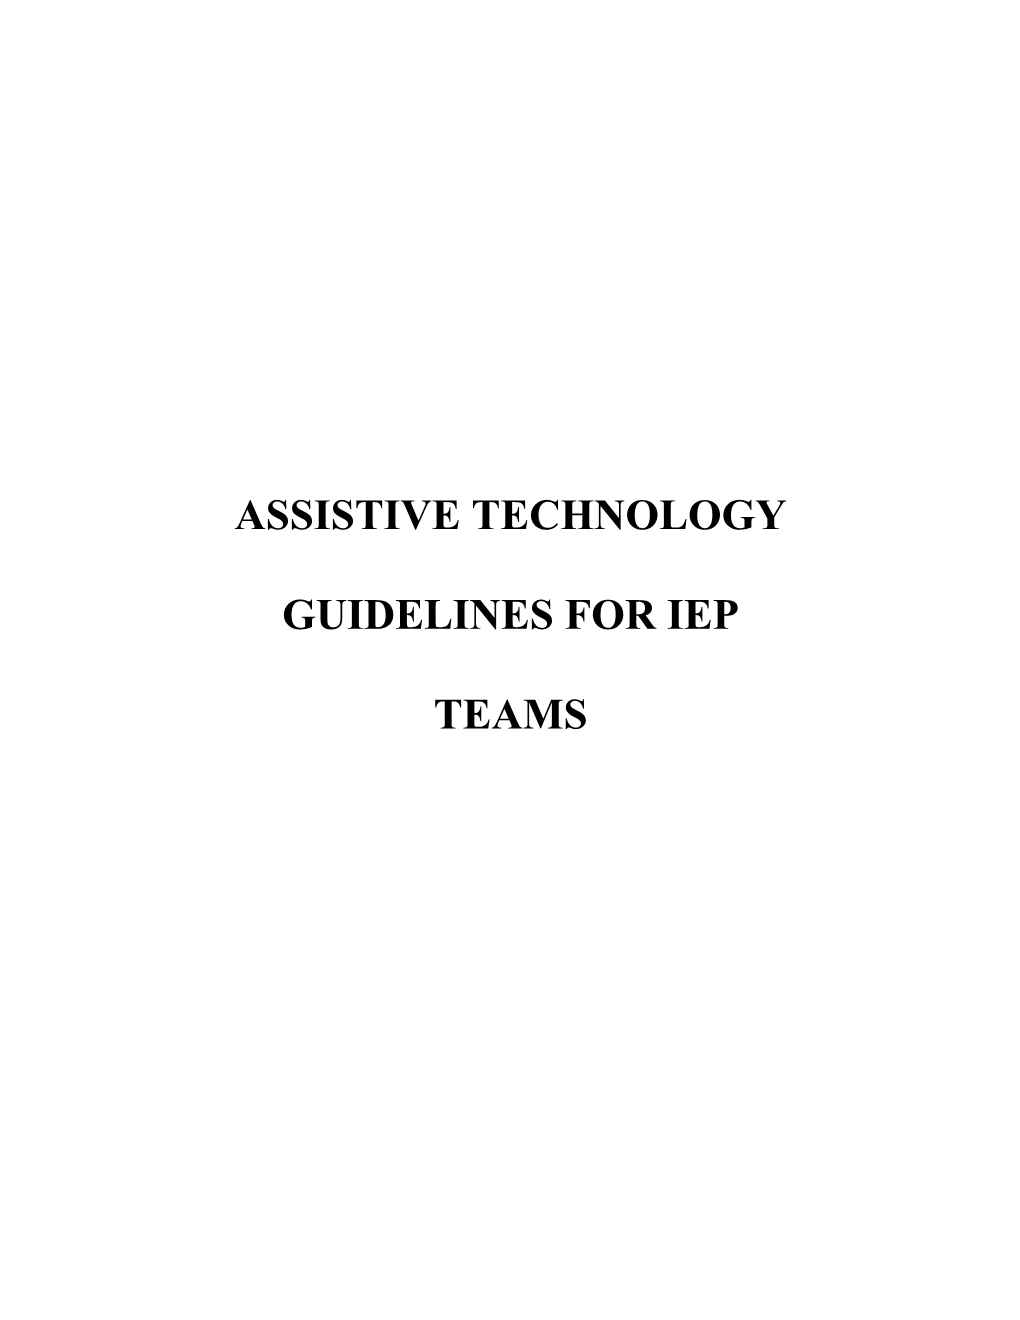 Guidelines Regarding Assistive Technology for IEP Teams